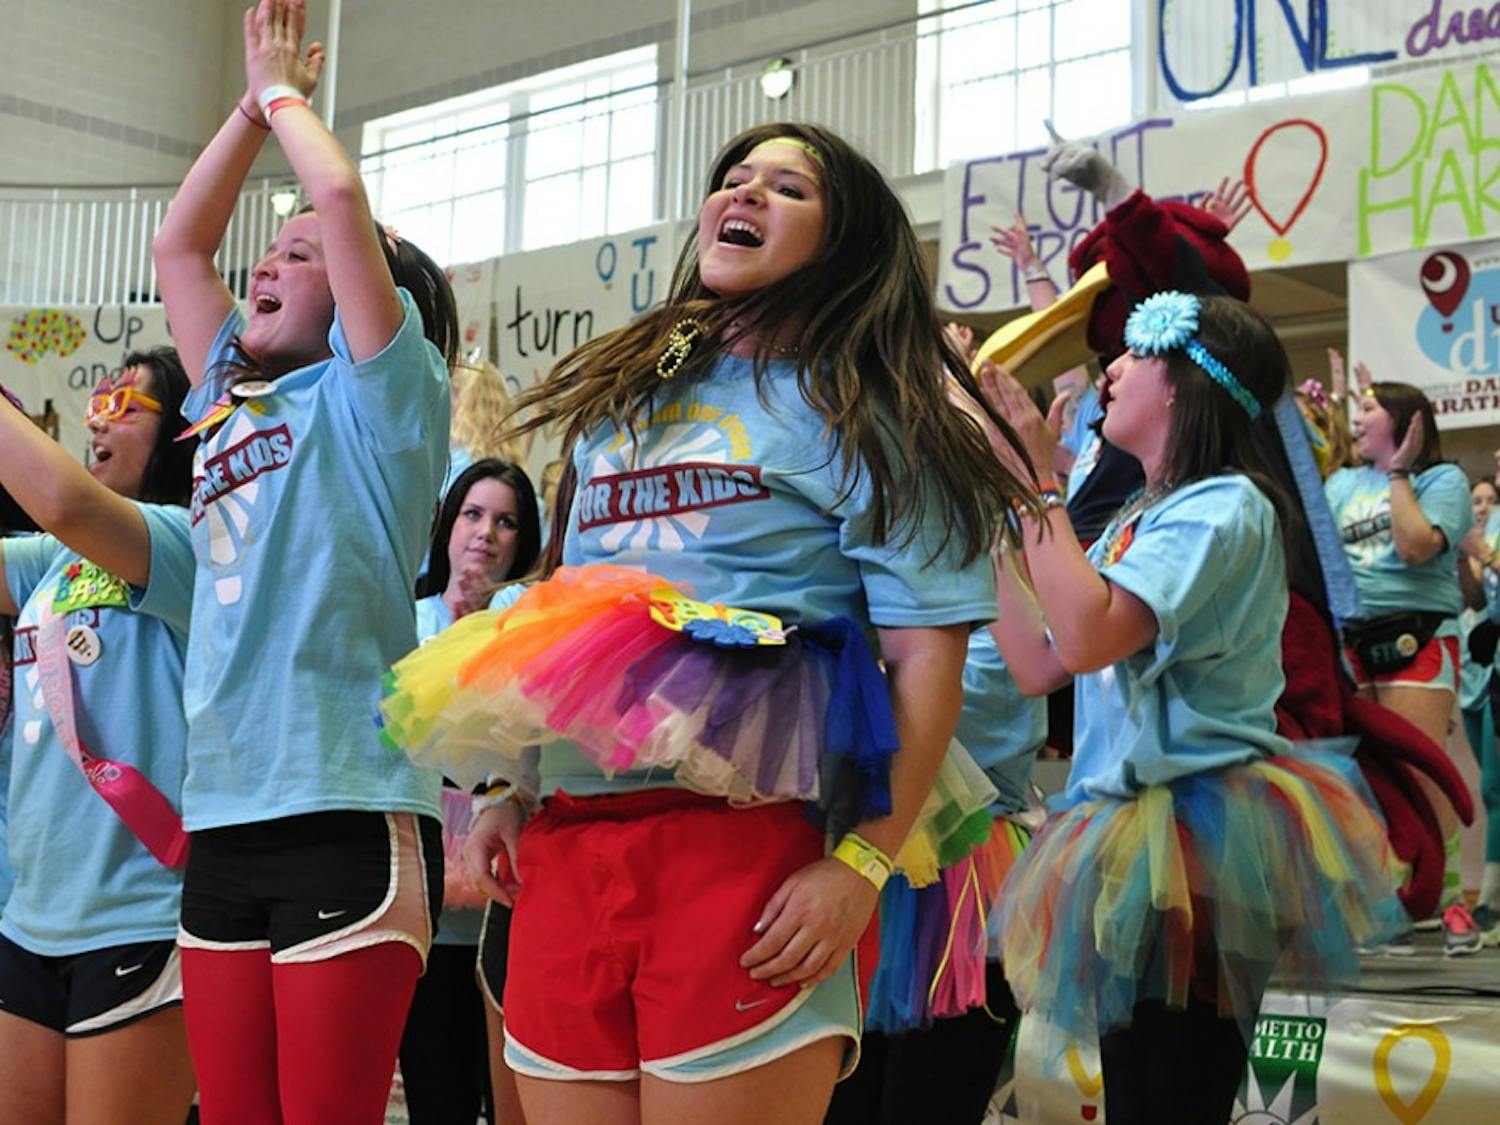 	The morale team shows off the carefully choreographed dance routine that Dance Marathon participants learn over the duration of the 24 hour event.
Brian Almond/The Daily Gamecock